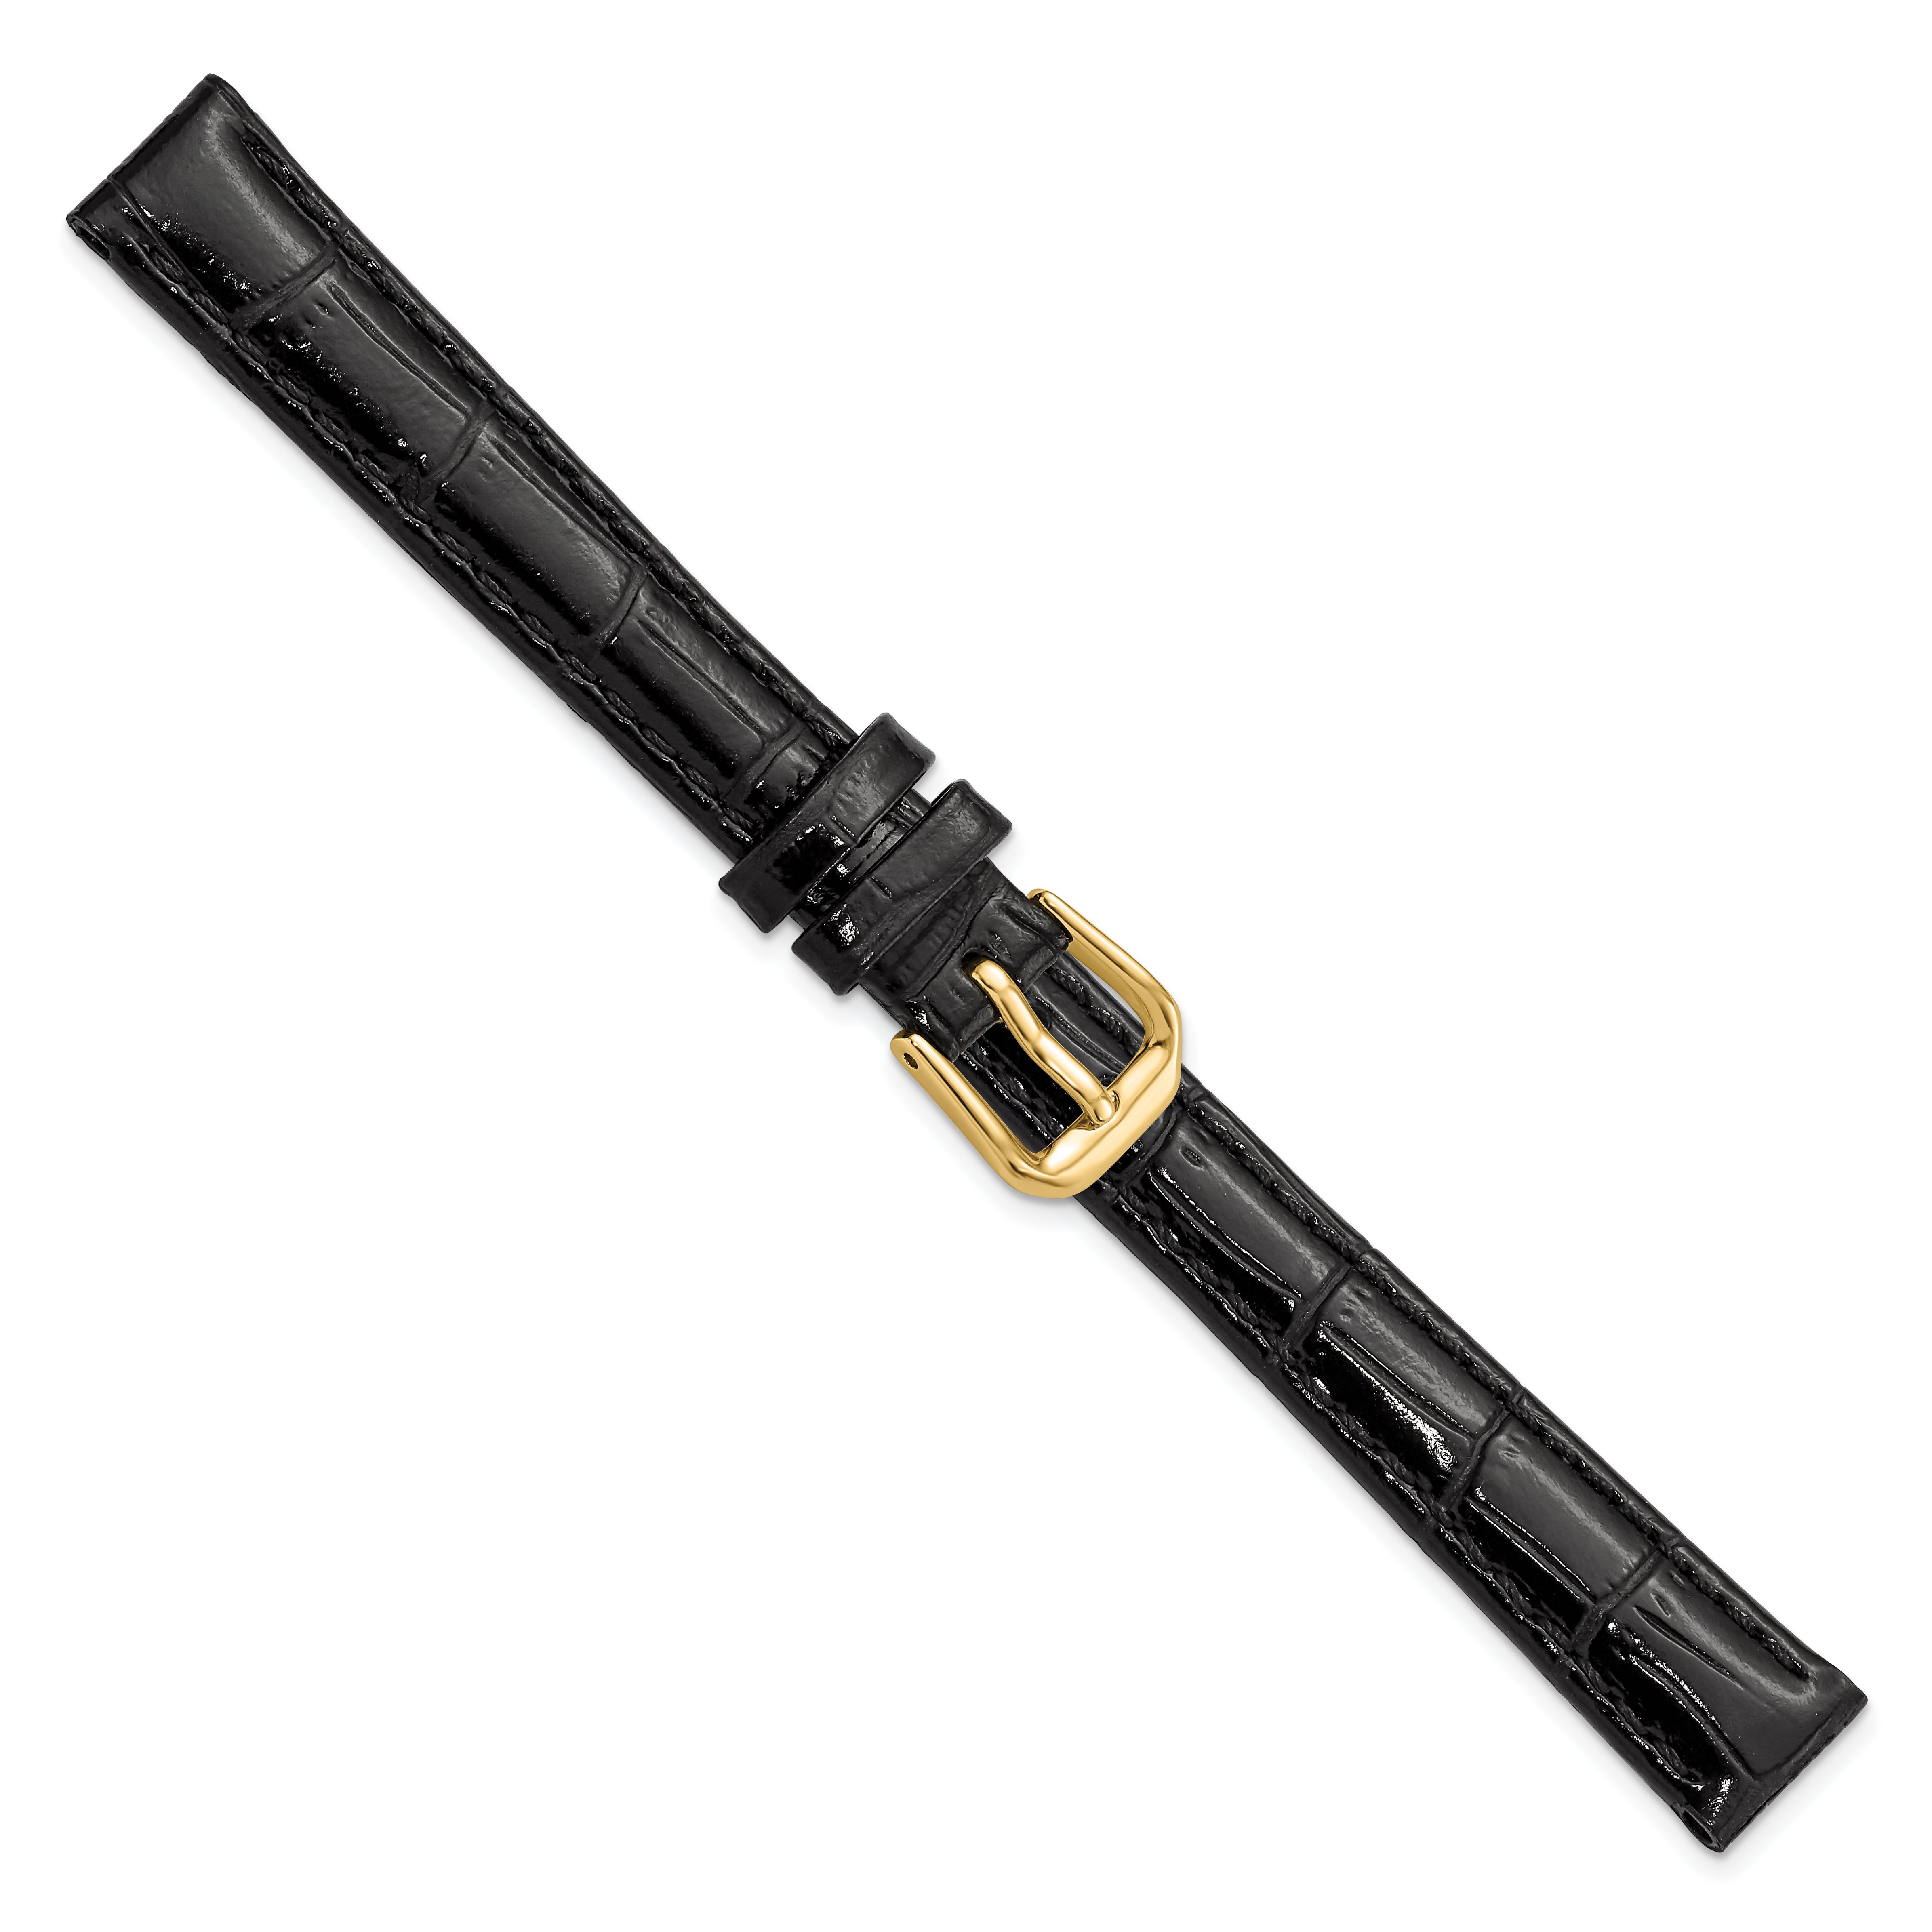 10mm Black Crocodile Grain Leather with Dark Stitching and Gold-tone Buckle 6.75 inch Watch Band